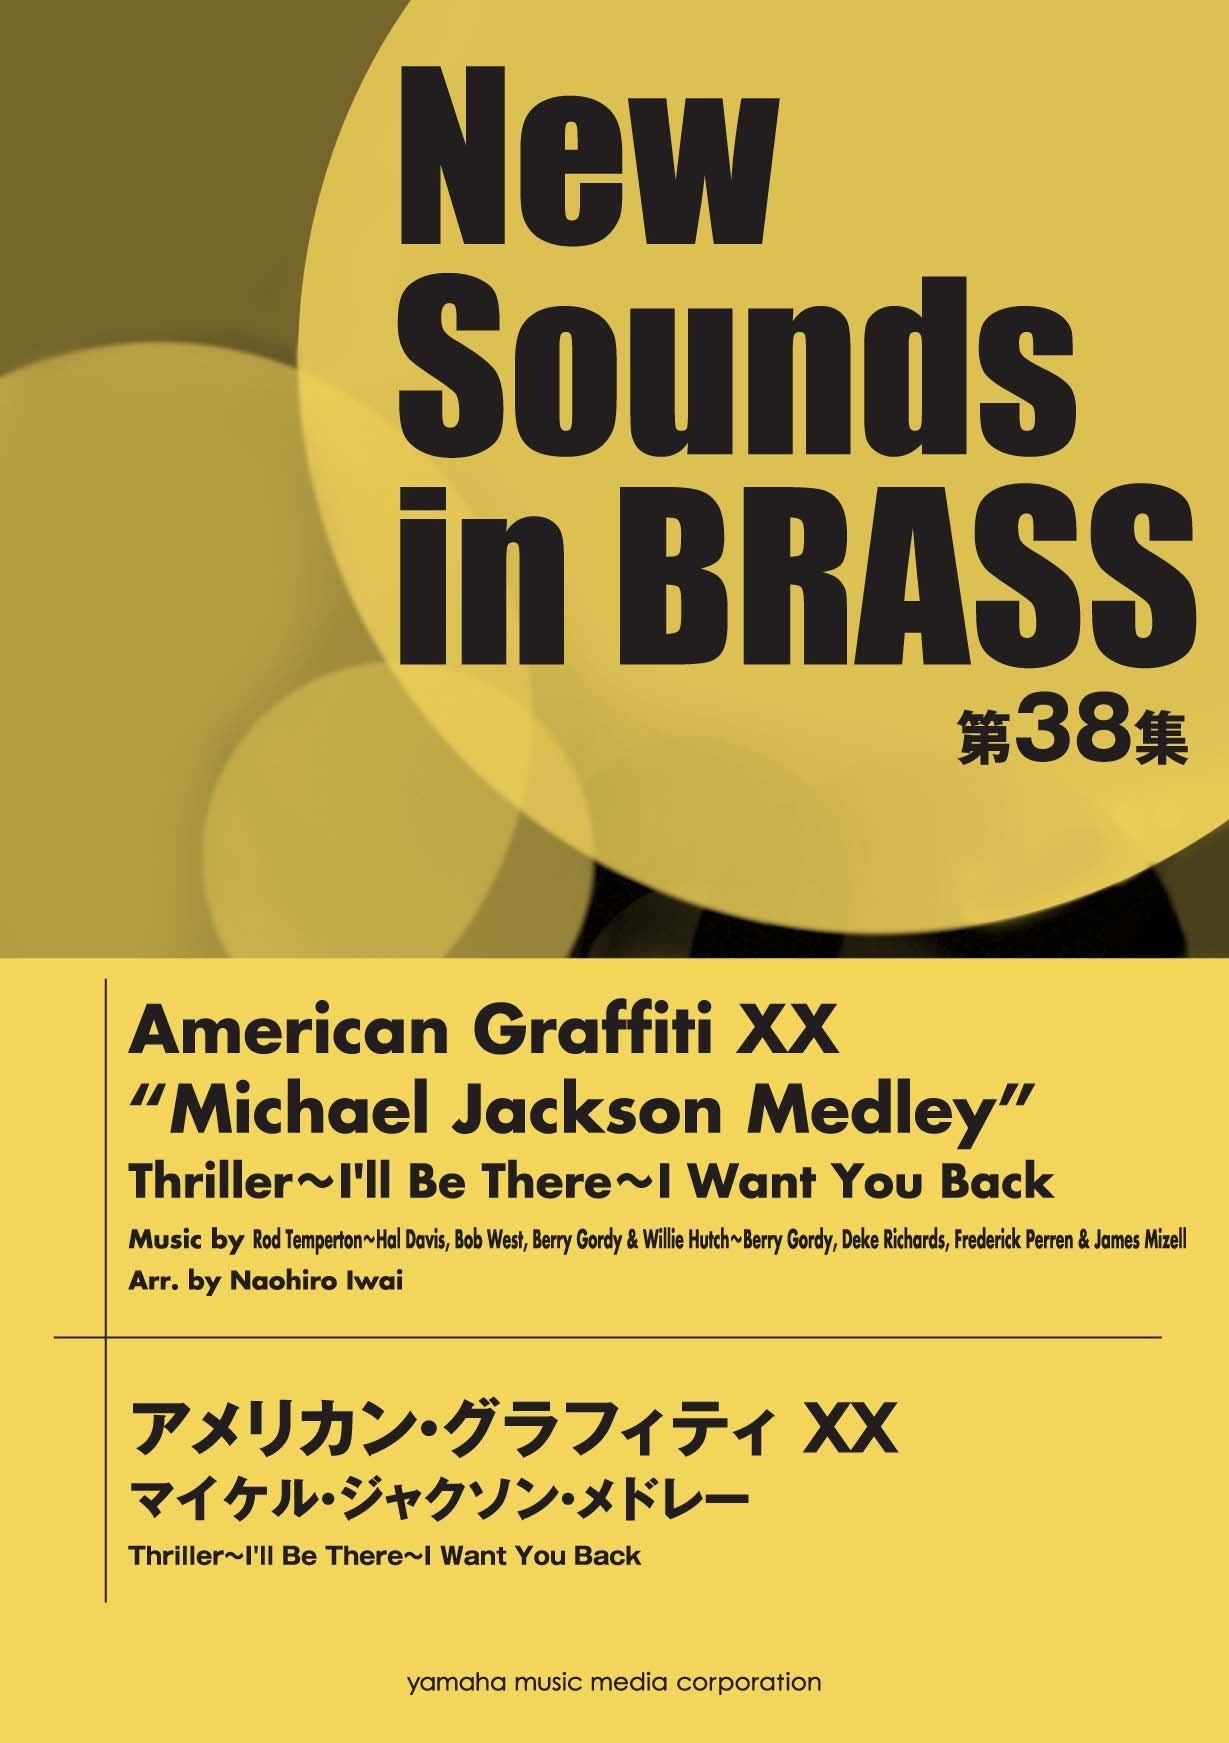 New Sounds in Brass NSB 第38集 アメリカン・グラフィティXX マイケル・ジャクソン・メドレー  スリラー～ I'll Be There～I Want You Back